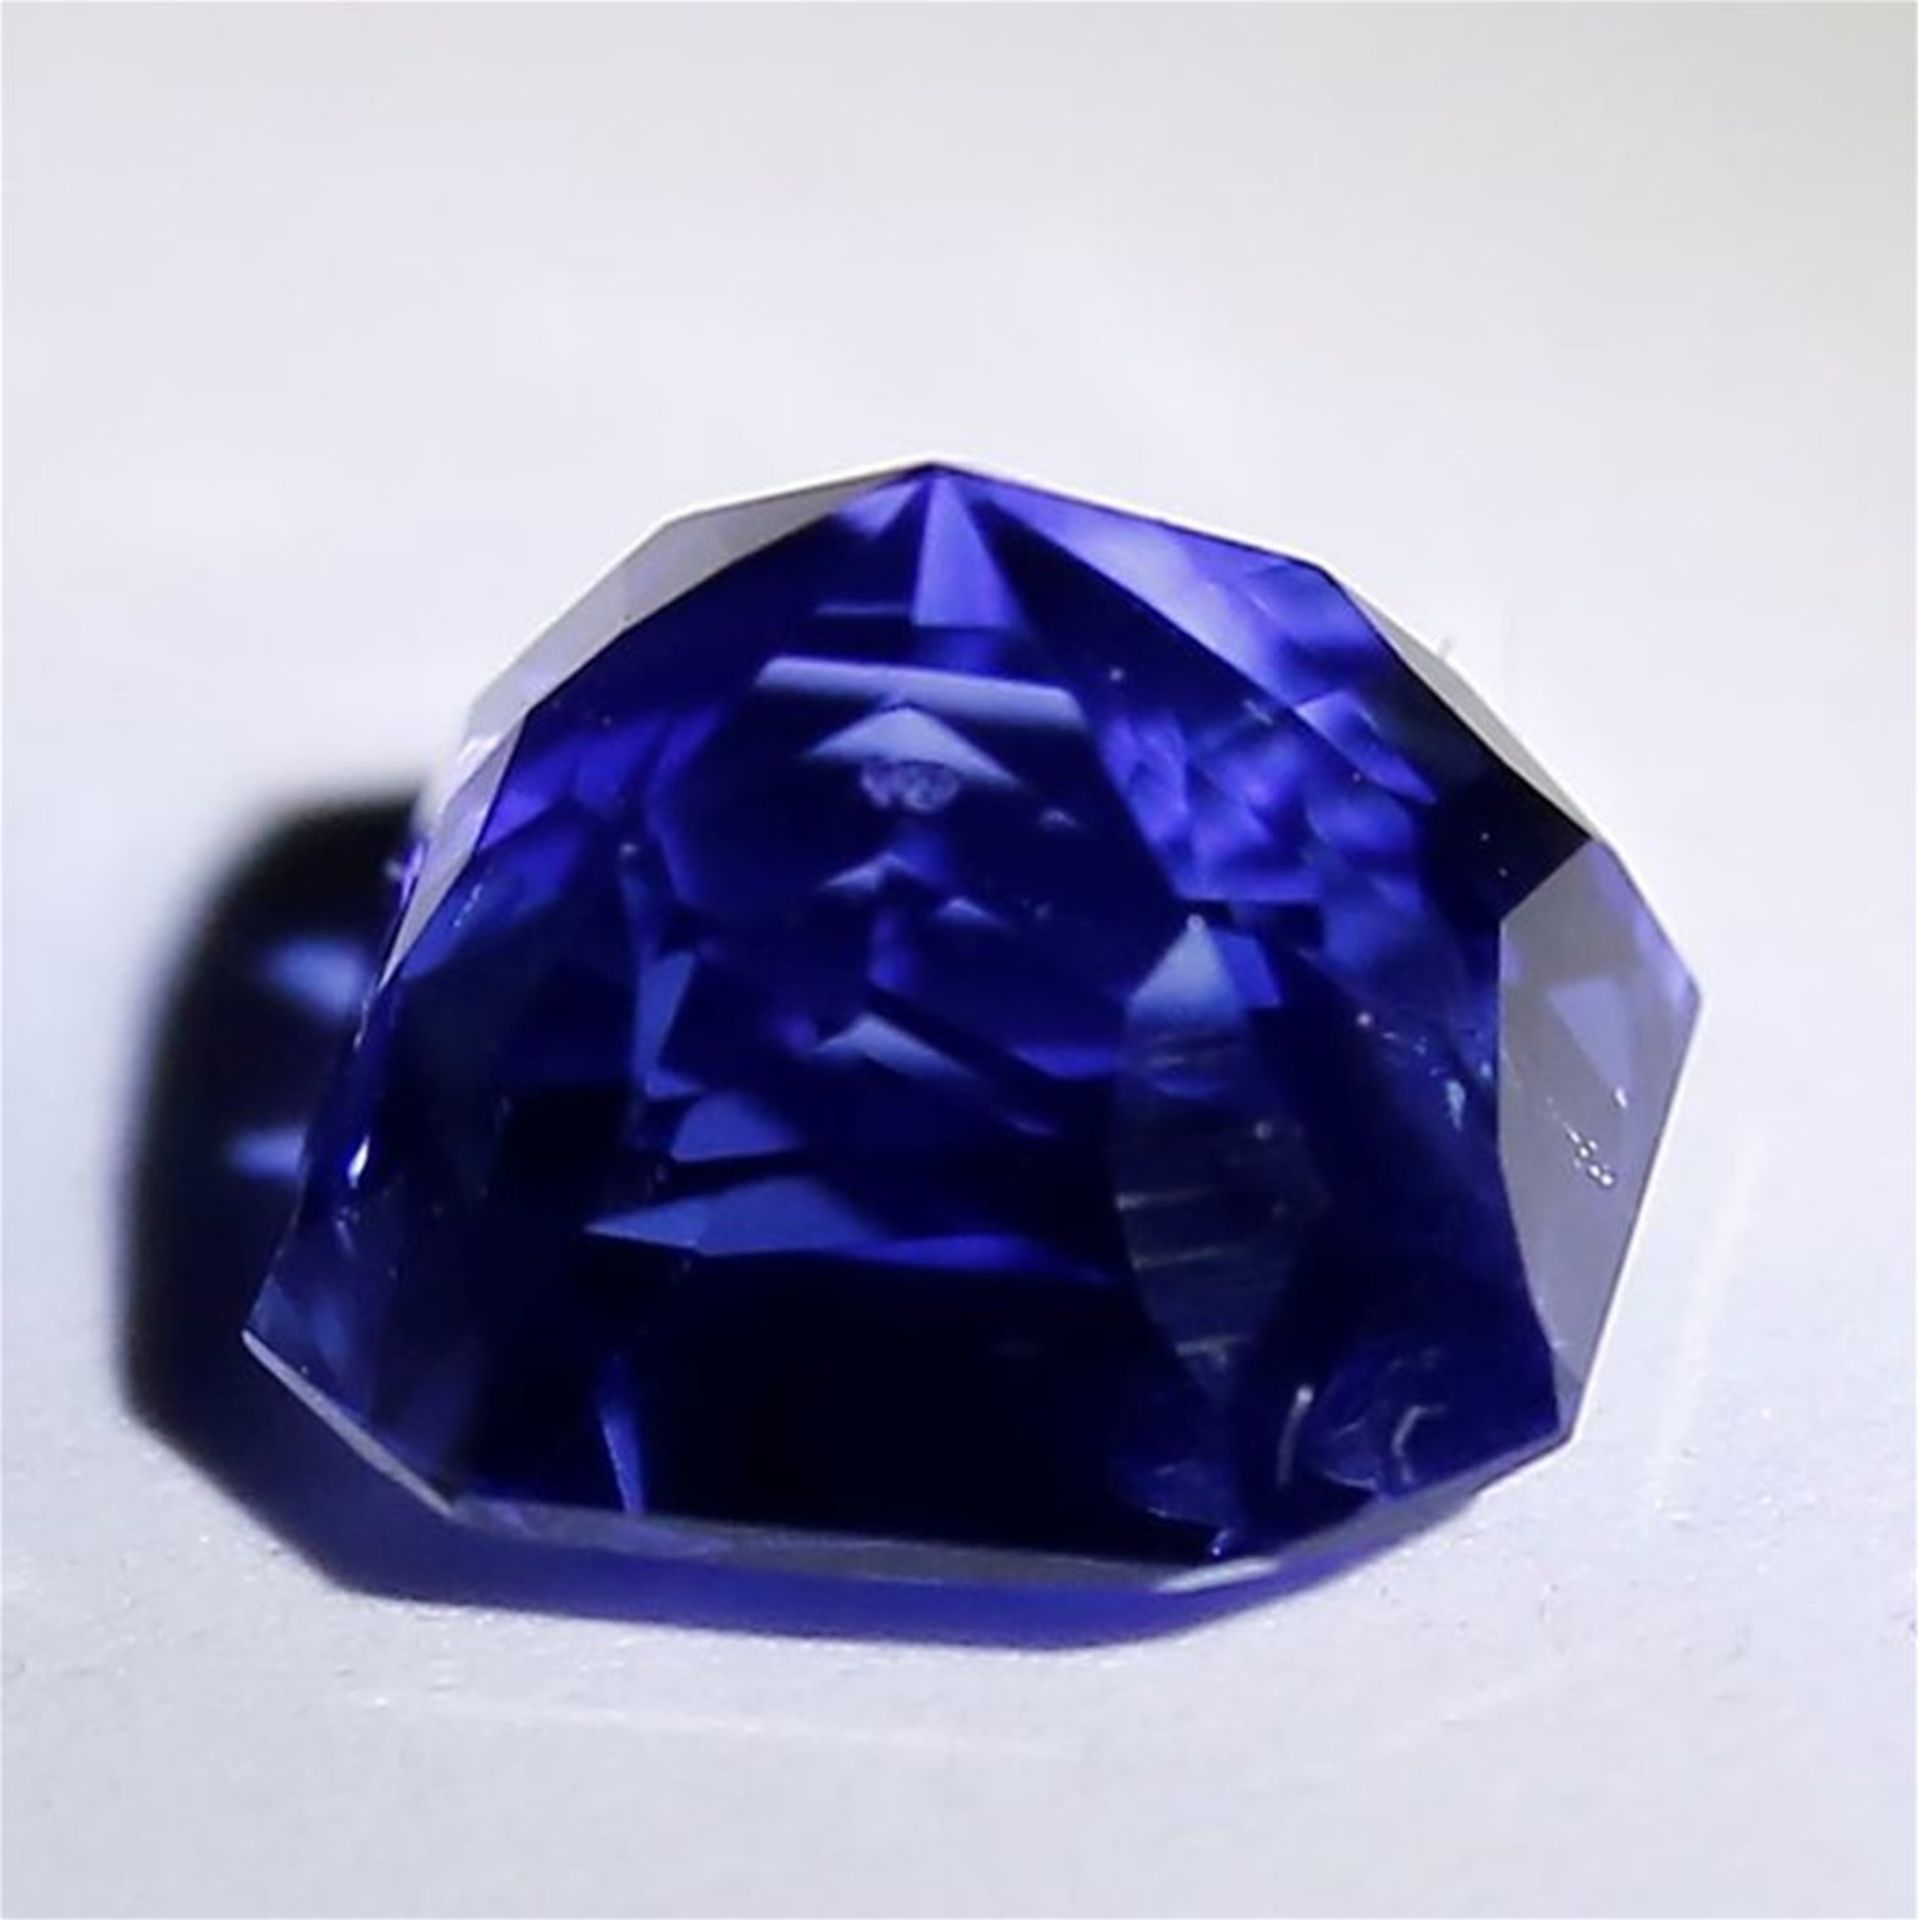 GIA Certified 3.51 ct. Untreated Blue Sapphire - BURMA - Image 7 of 7